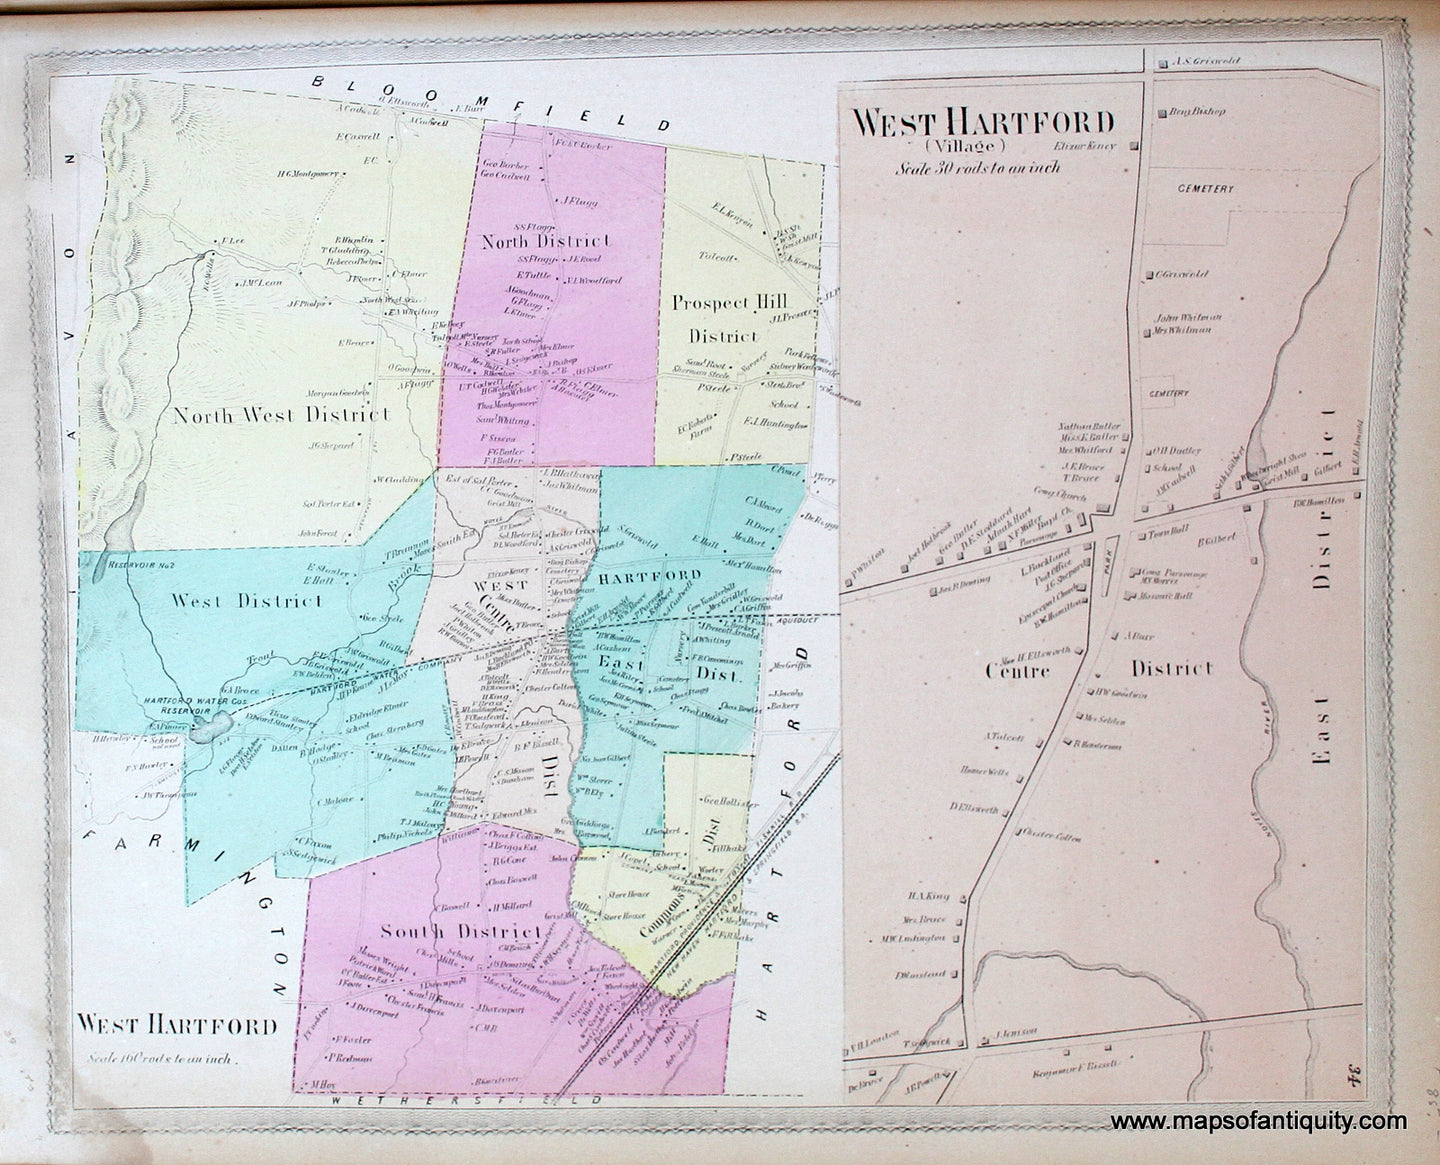 Antique-Hand-Colored-Map-Plan-of-the-town-of-West-Hartford-(CT)********-United-States-Northeast-1869-Baker-&-Tilden-Maps-Of-Antiquity